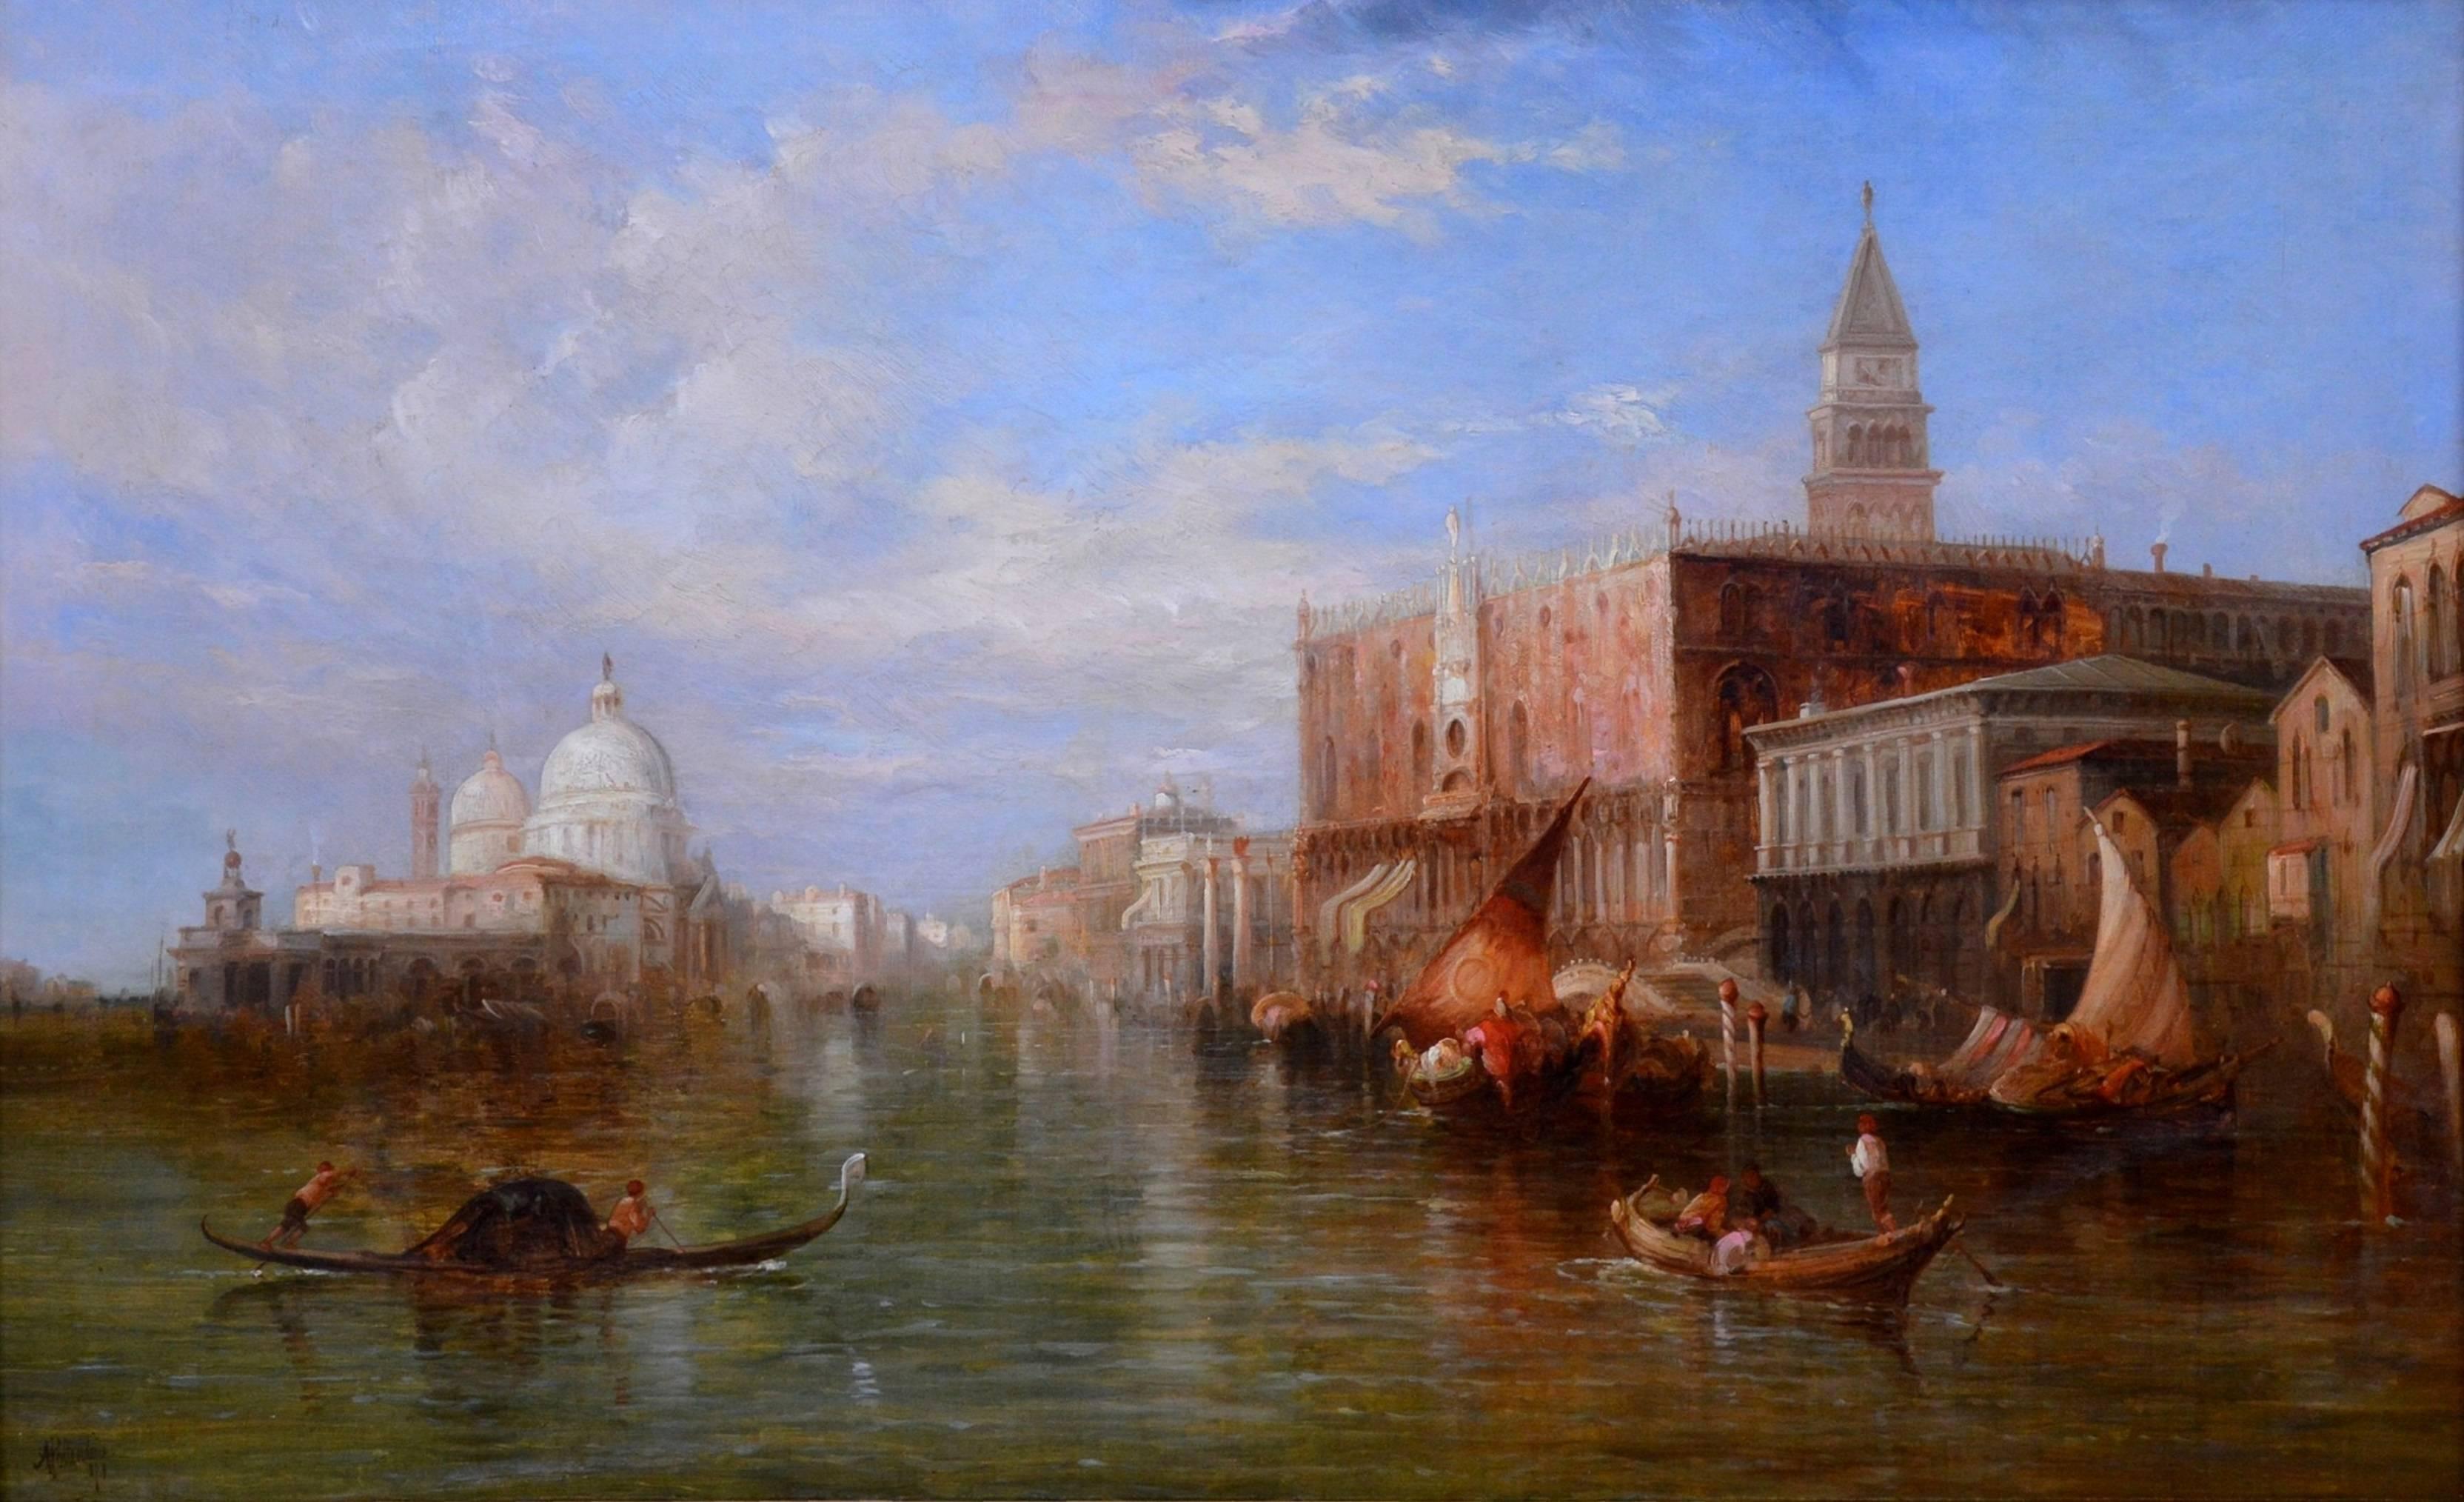 The Grand Canal - Venice - 19th Century Oil Painting - Alfred Pollentine 2